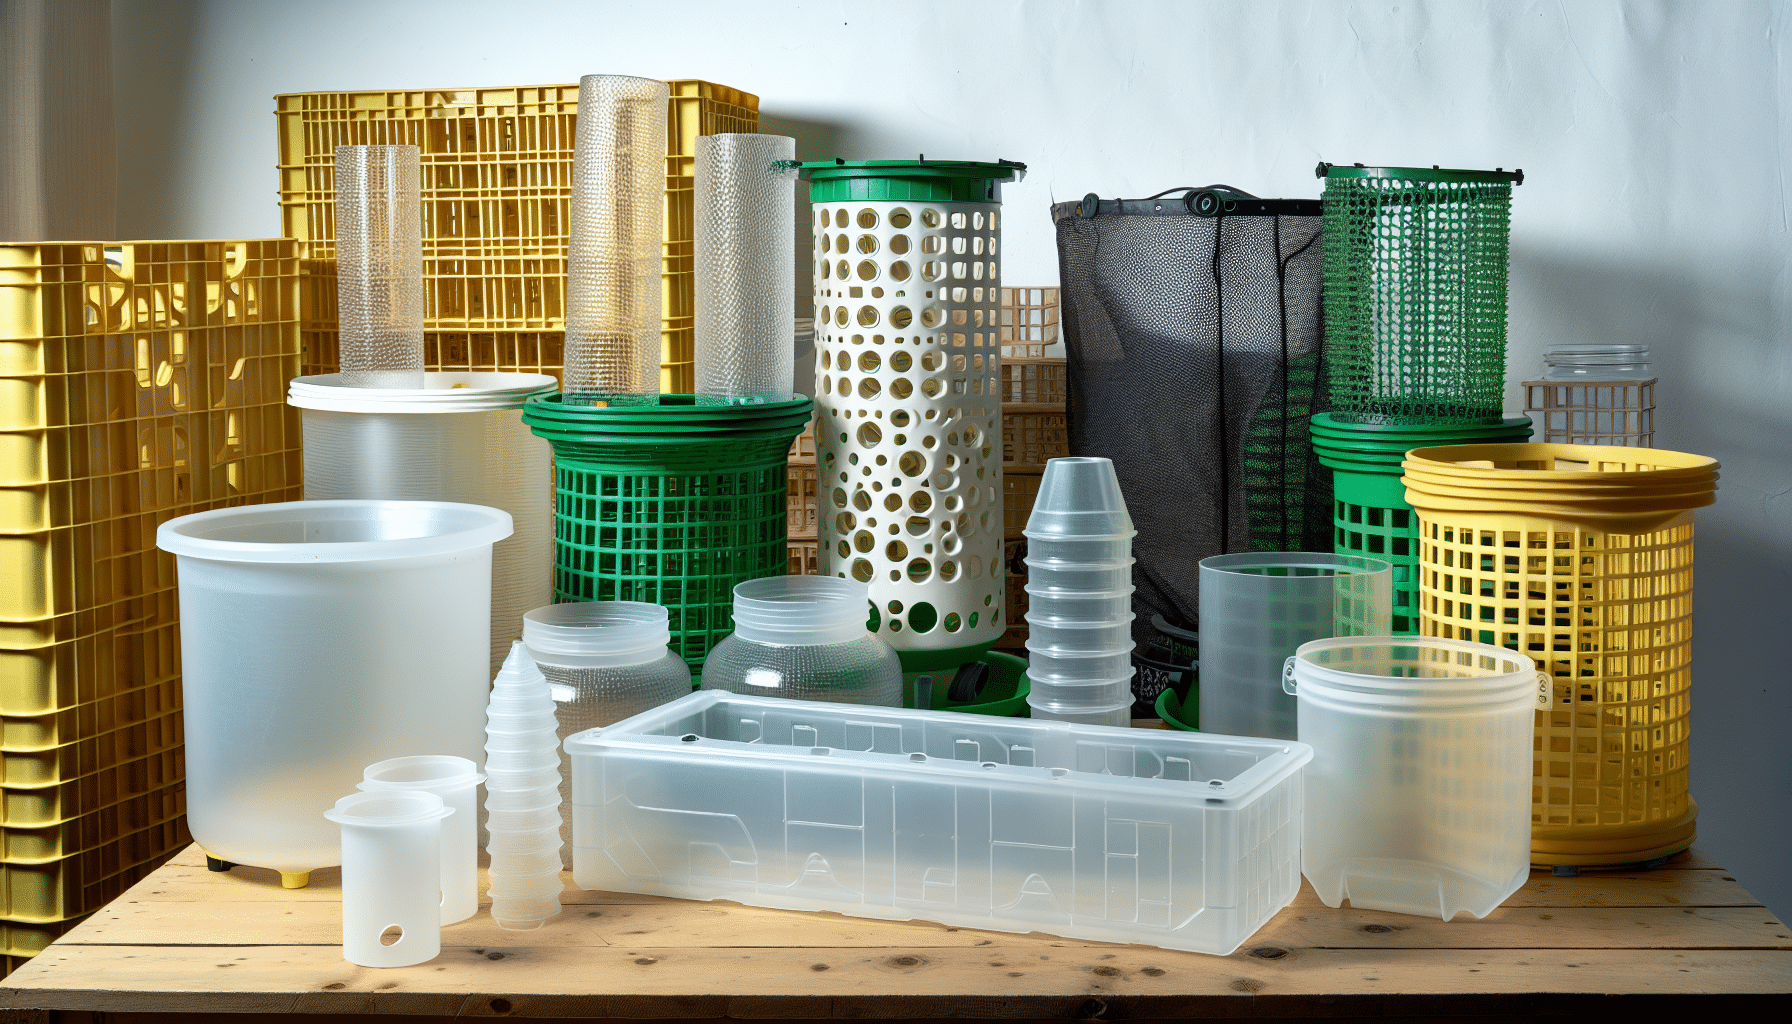 Containers for hydroponic gardening including reservoirs and net pots